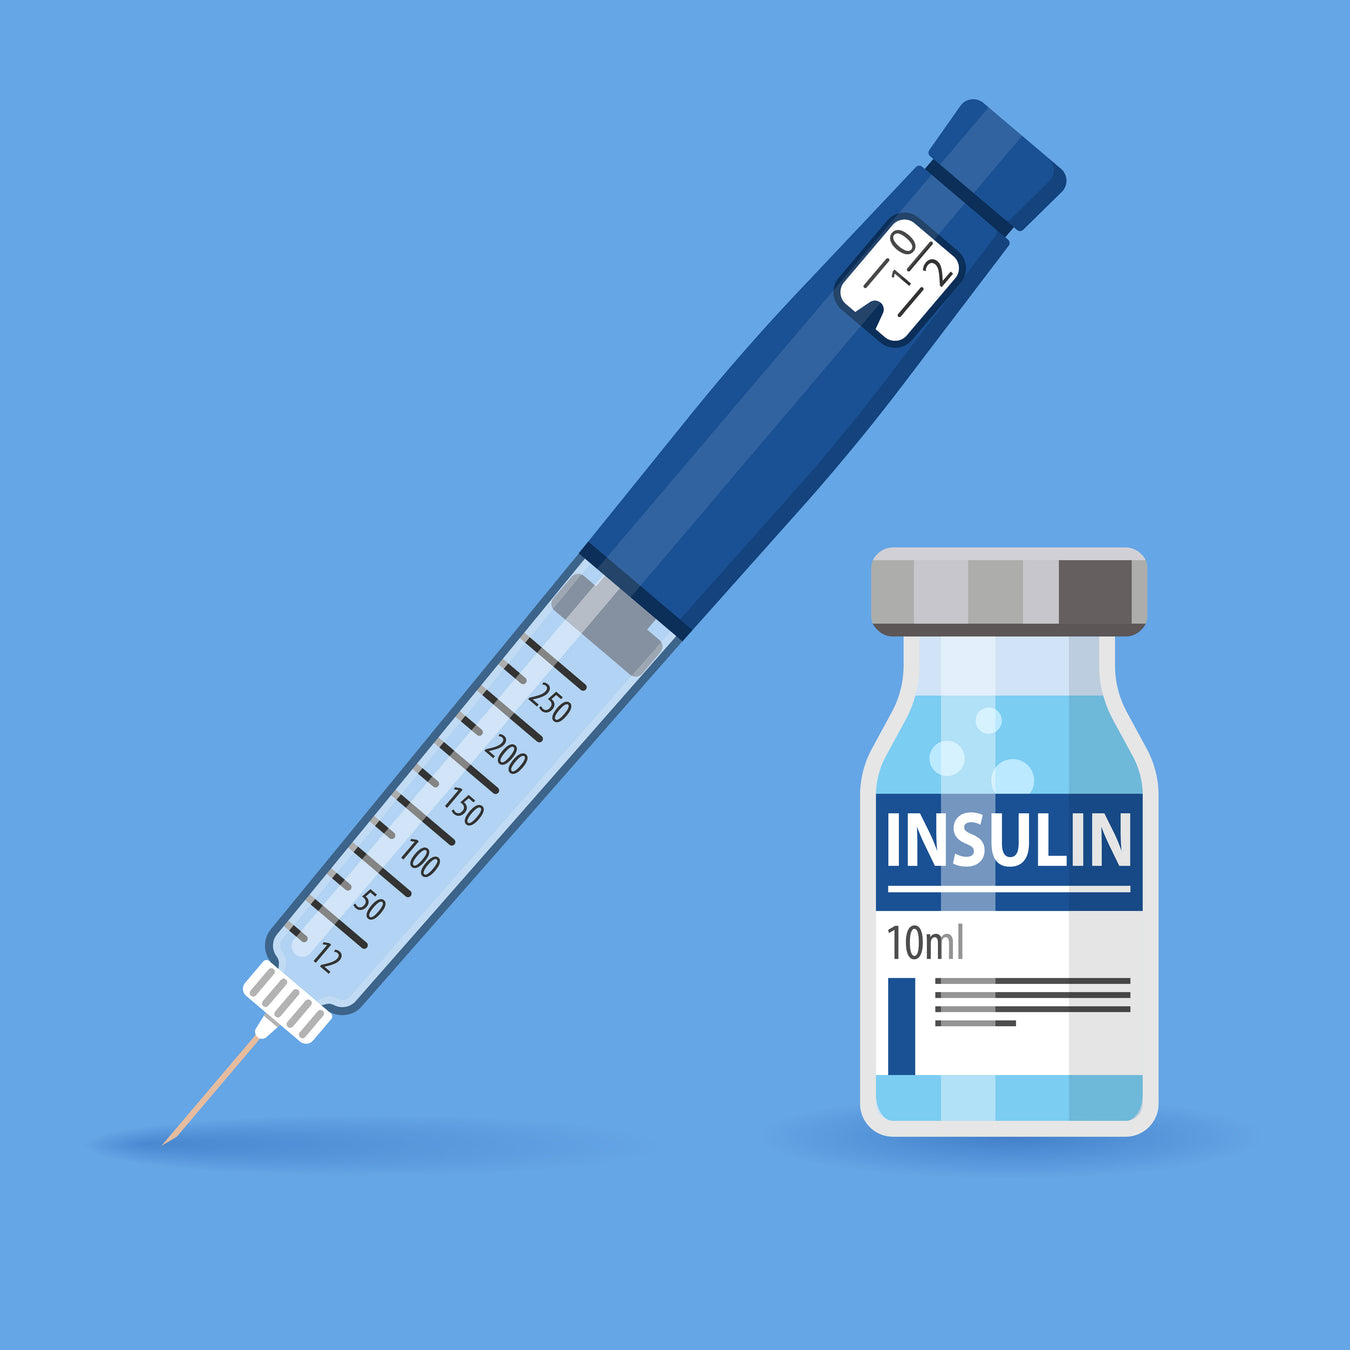 A syringe and a vial of insulin.